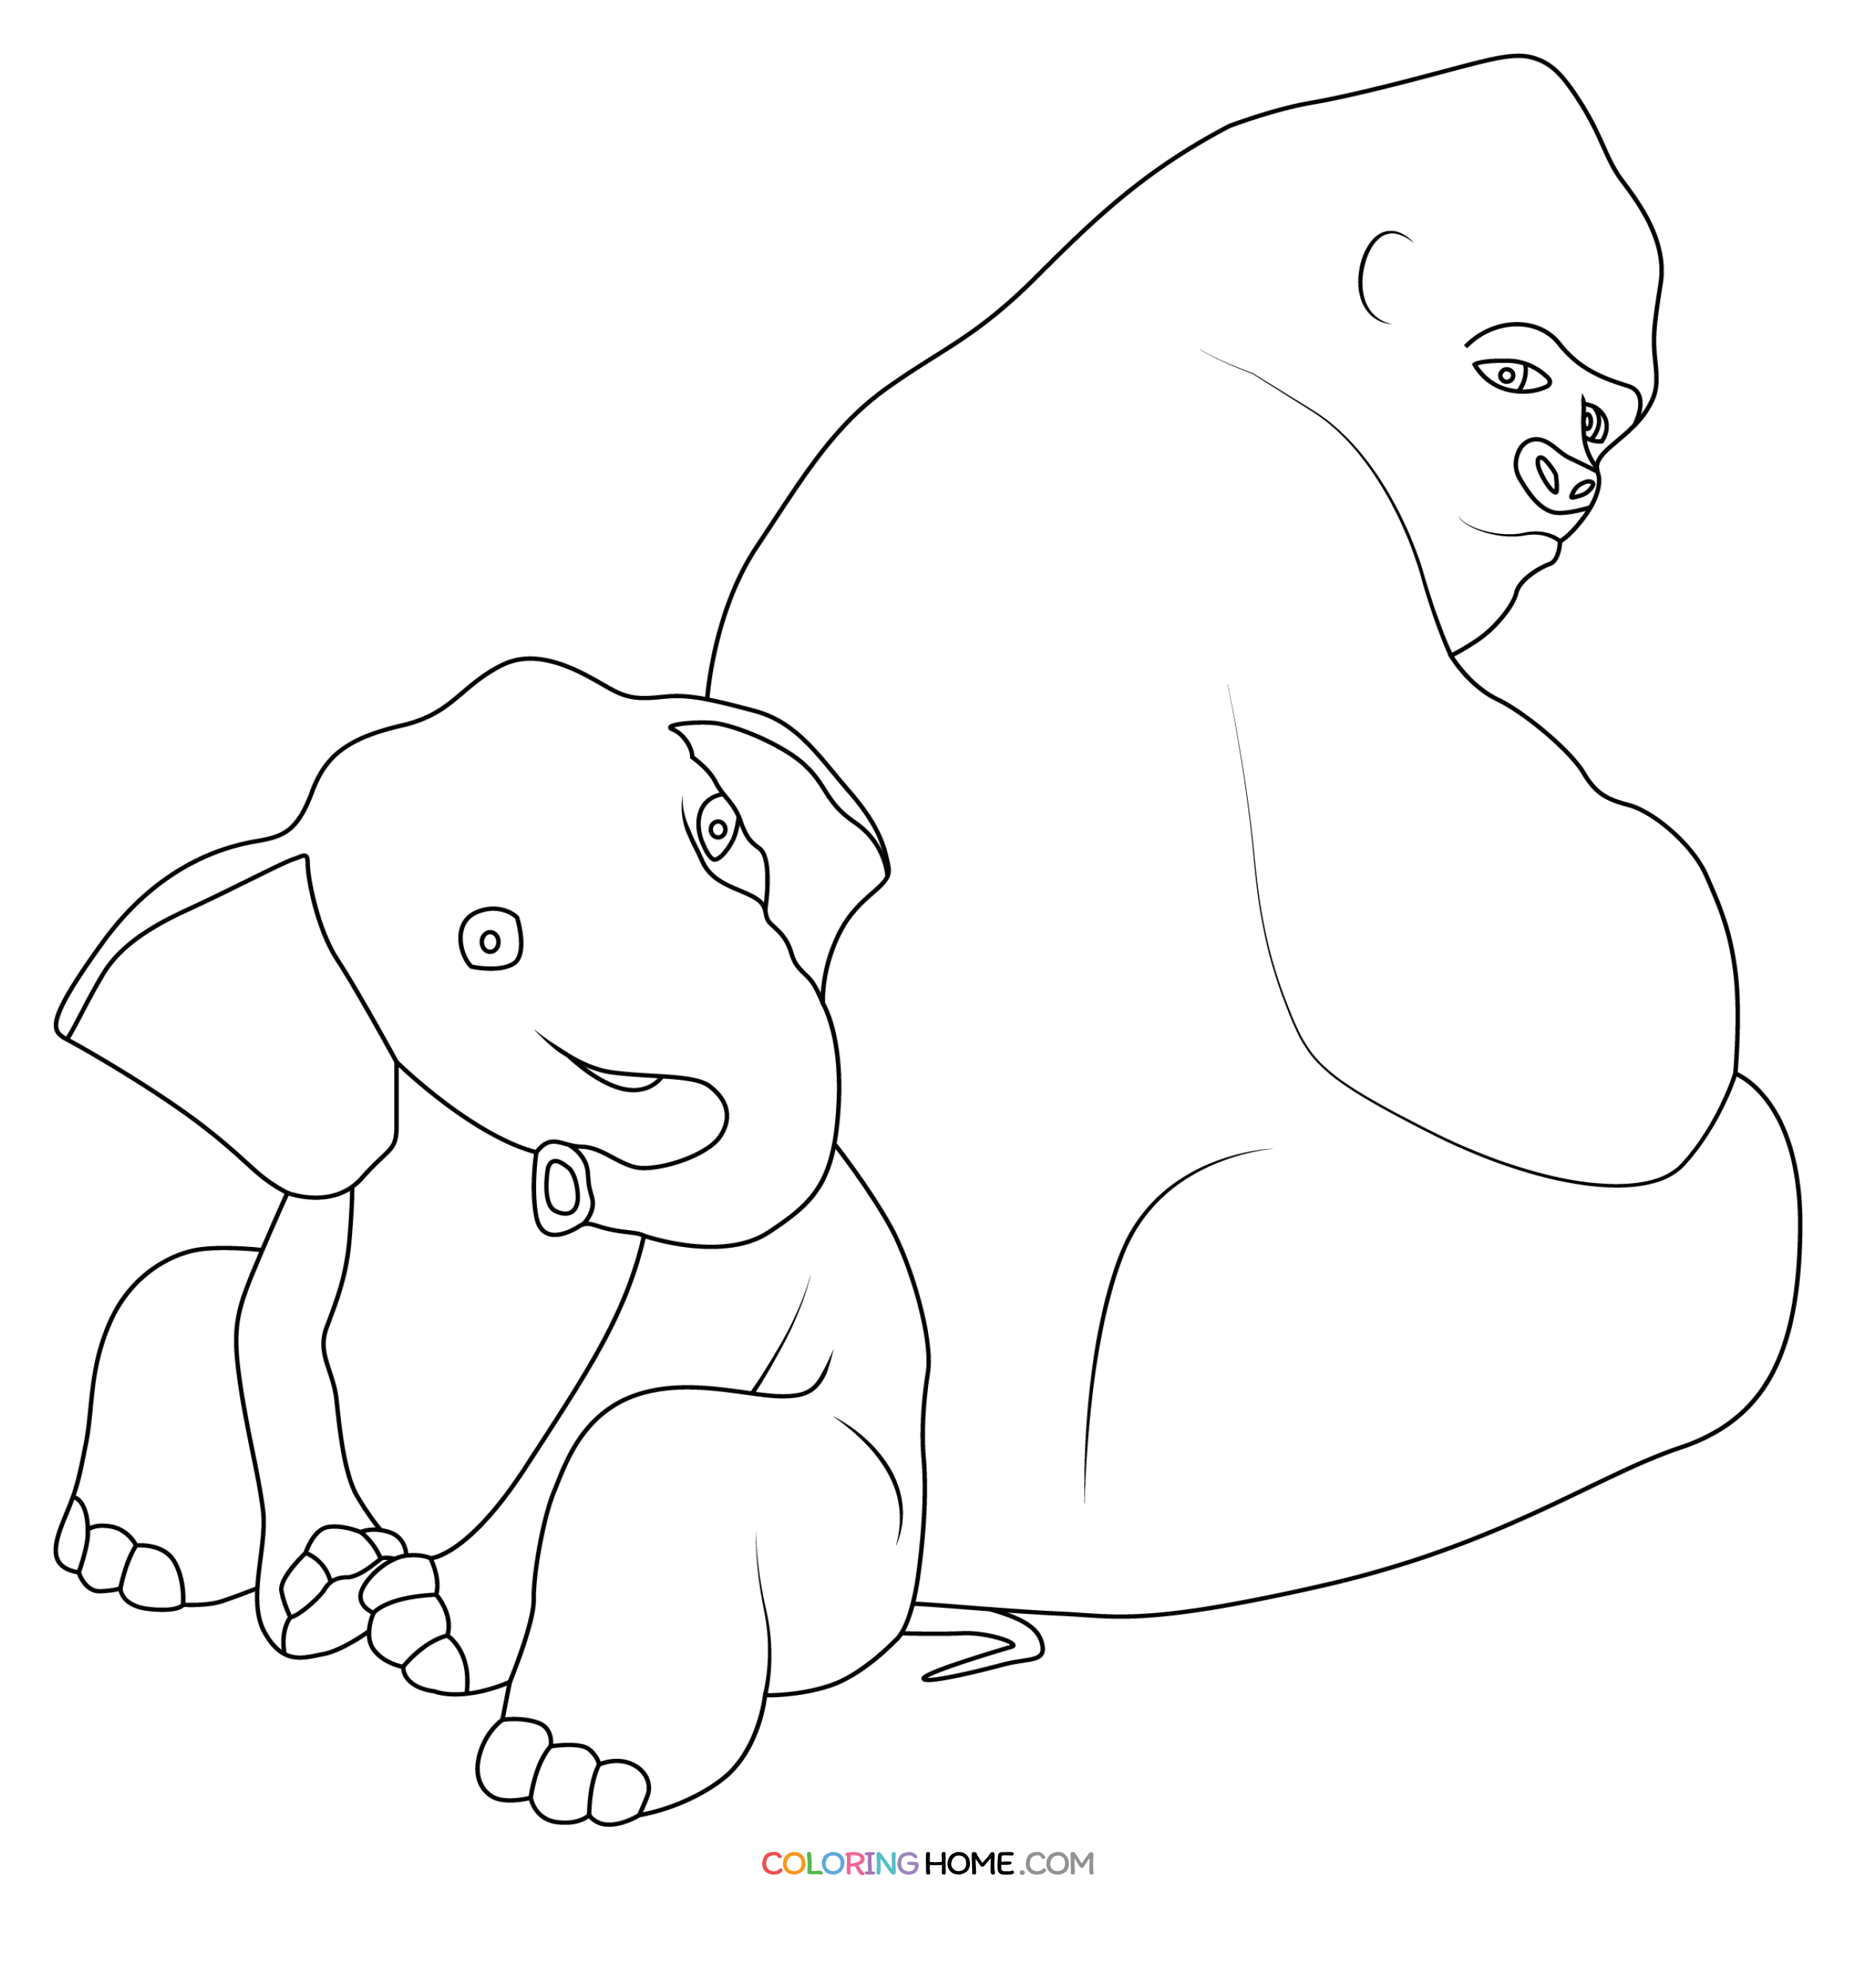 The One and Only Ivan coloring page